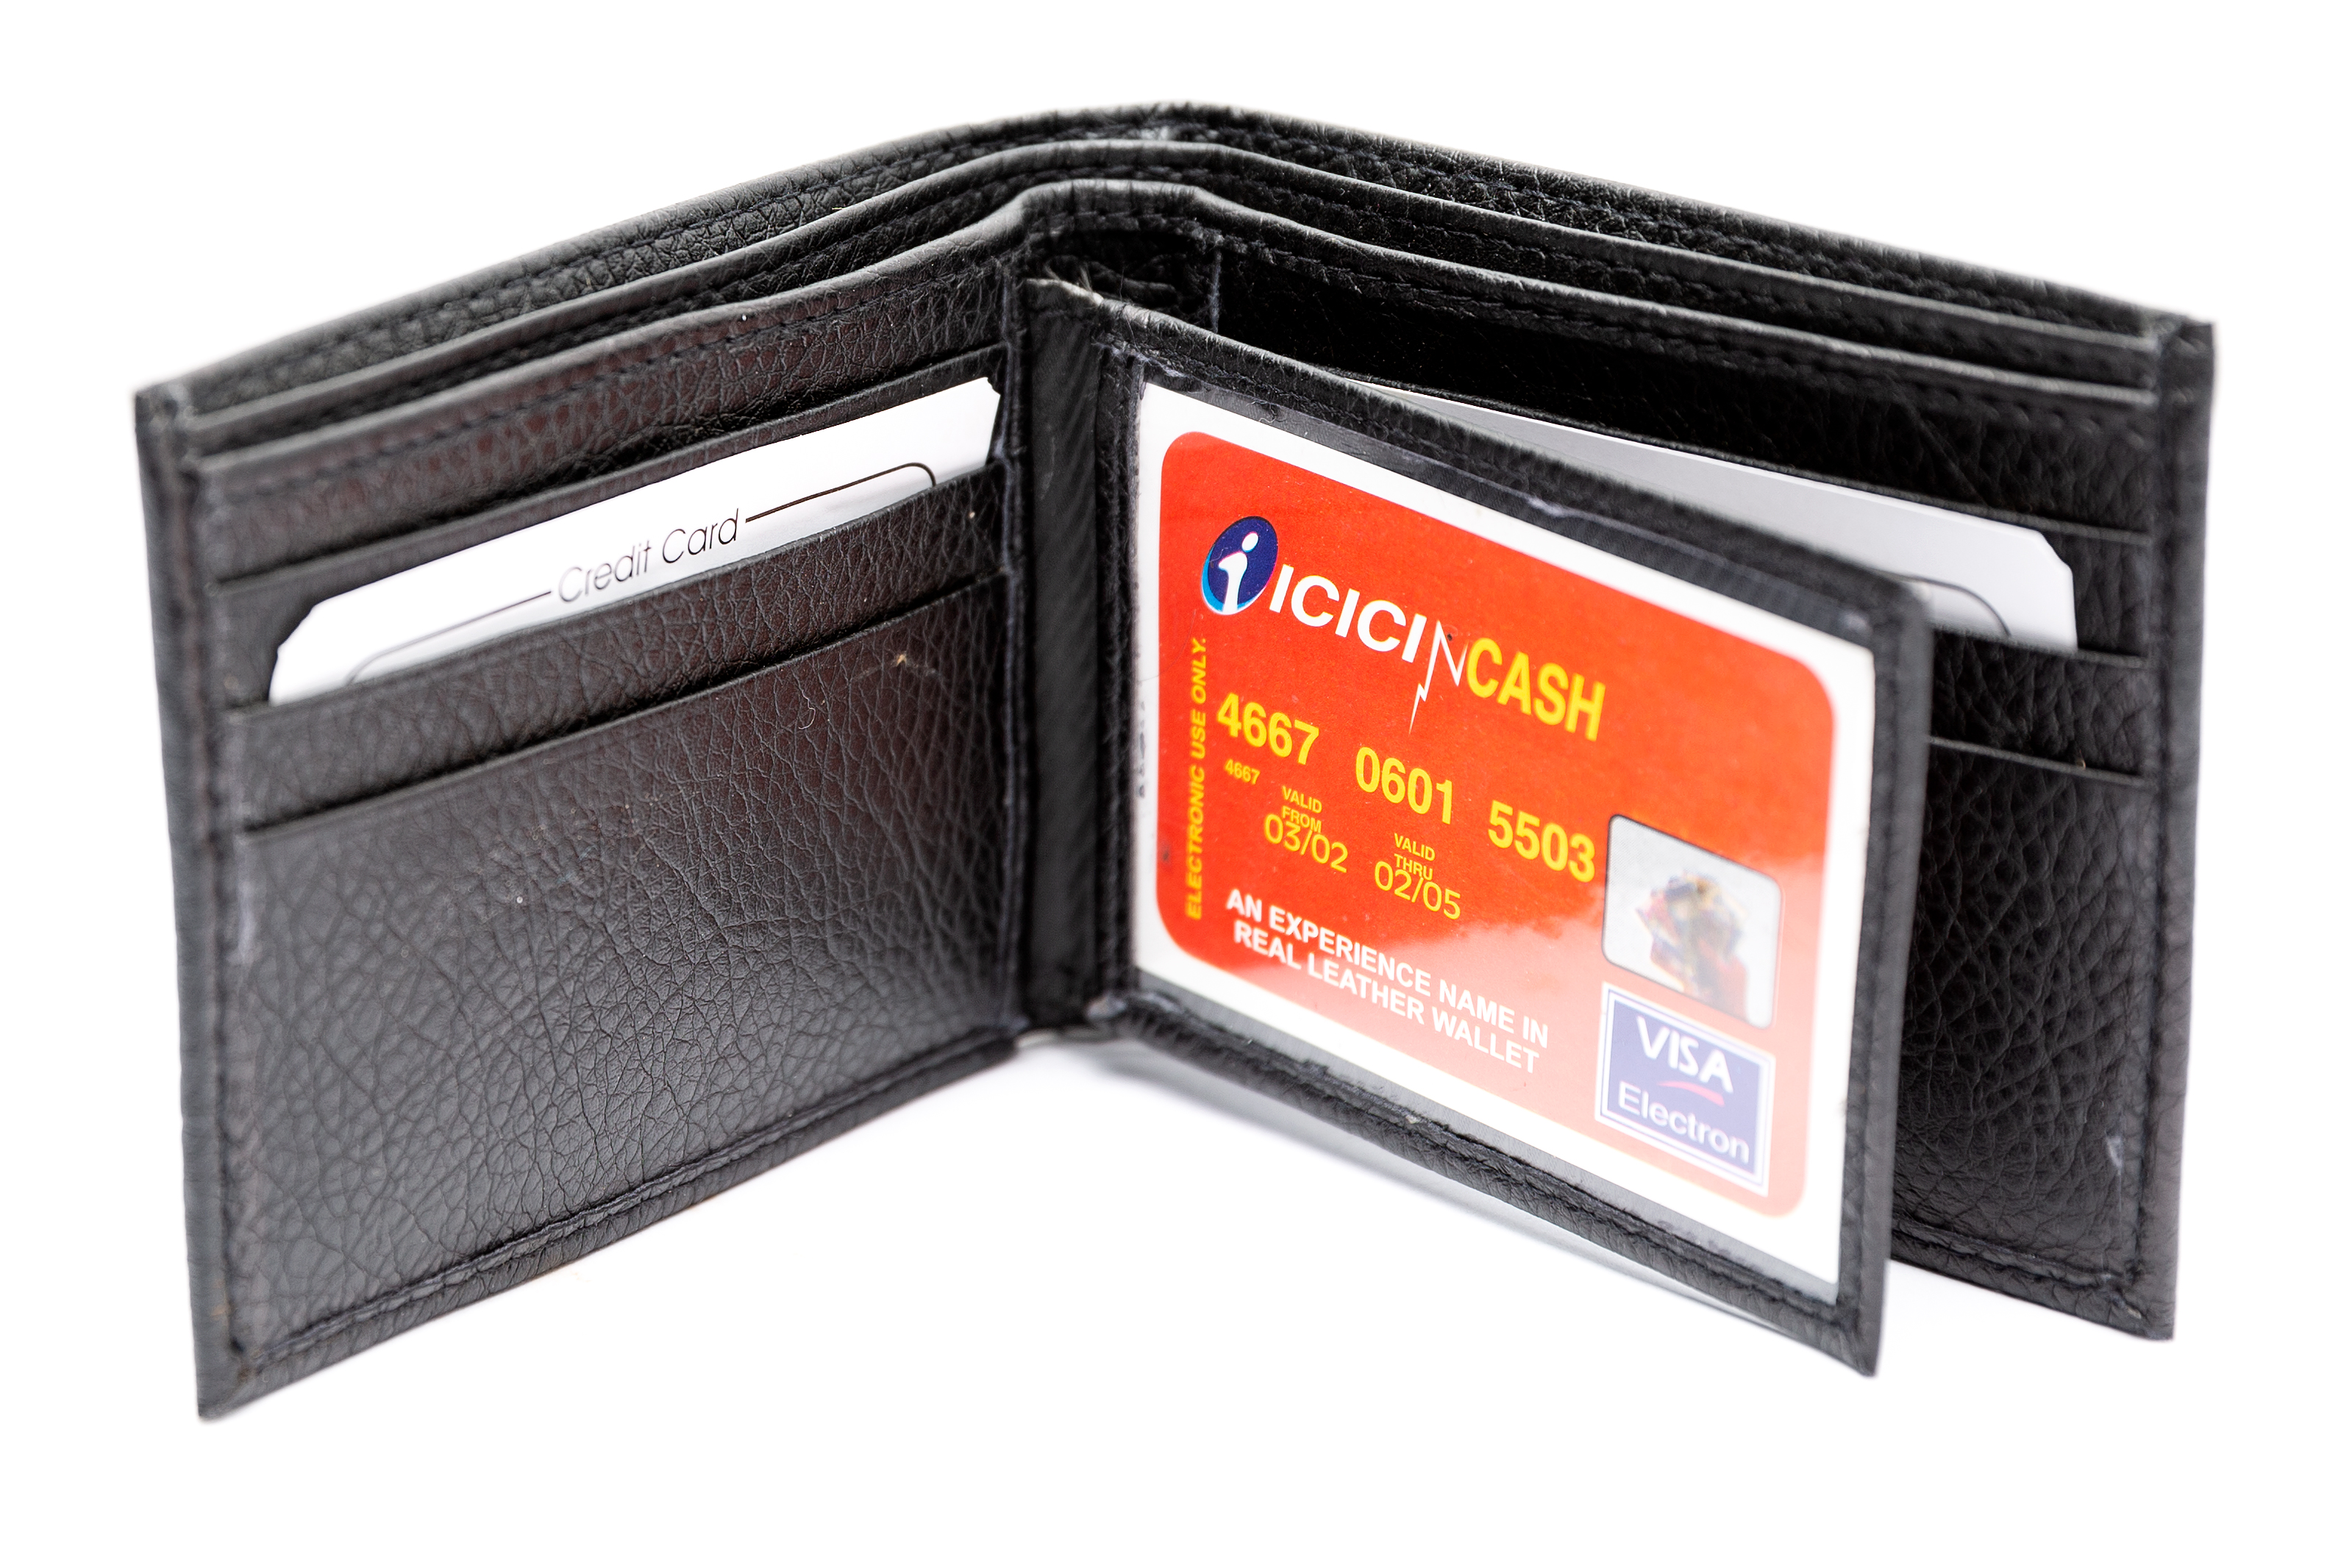 Men's Faux Leather 6 Credit Card Slot 2 ID in Black 3.25 x 4.5 inches #SW-2924 Leather Wallet